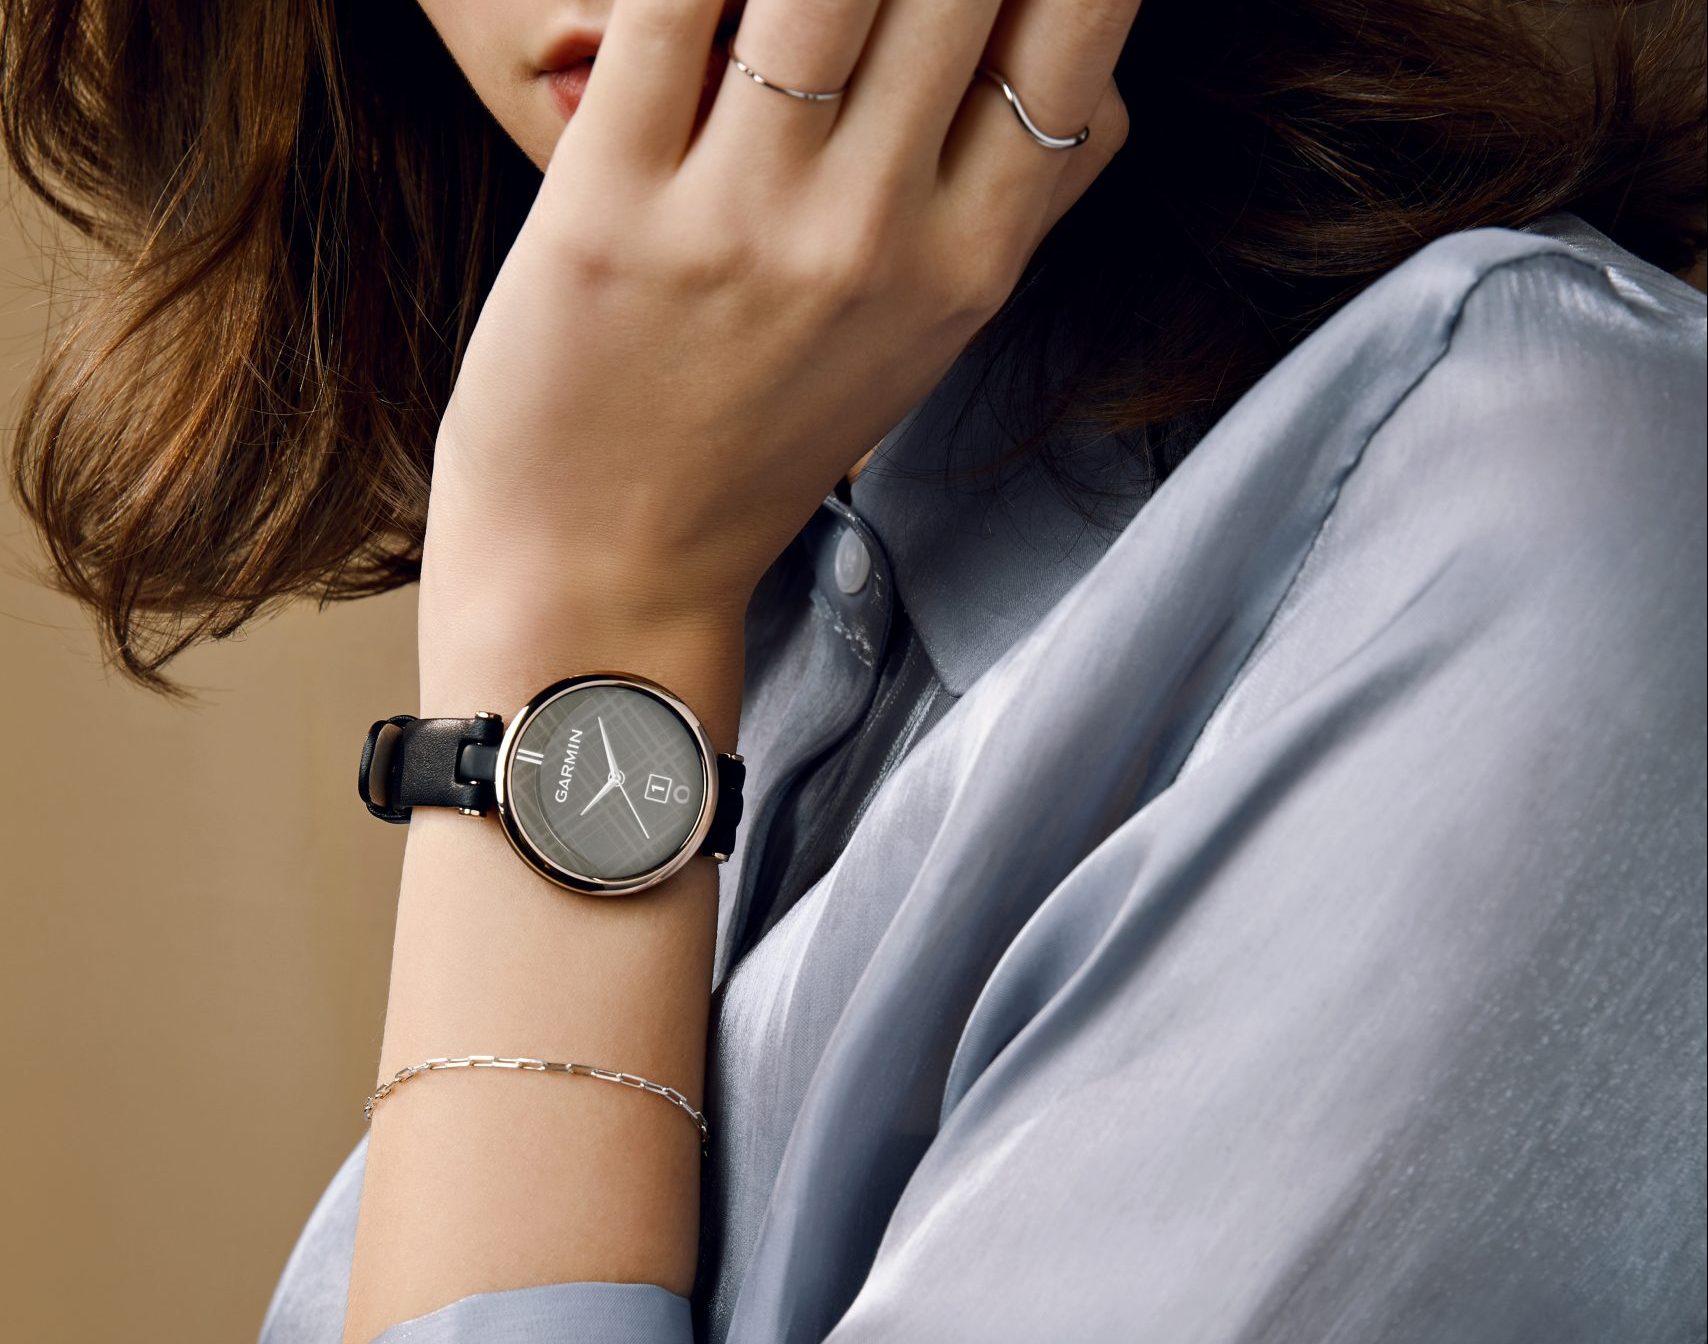 Fashion-Forward Smartwatches for the Modern Woman